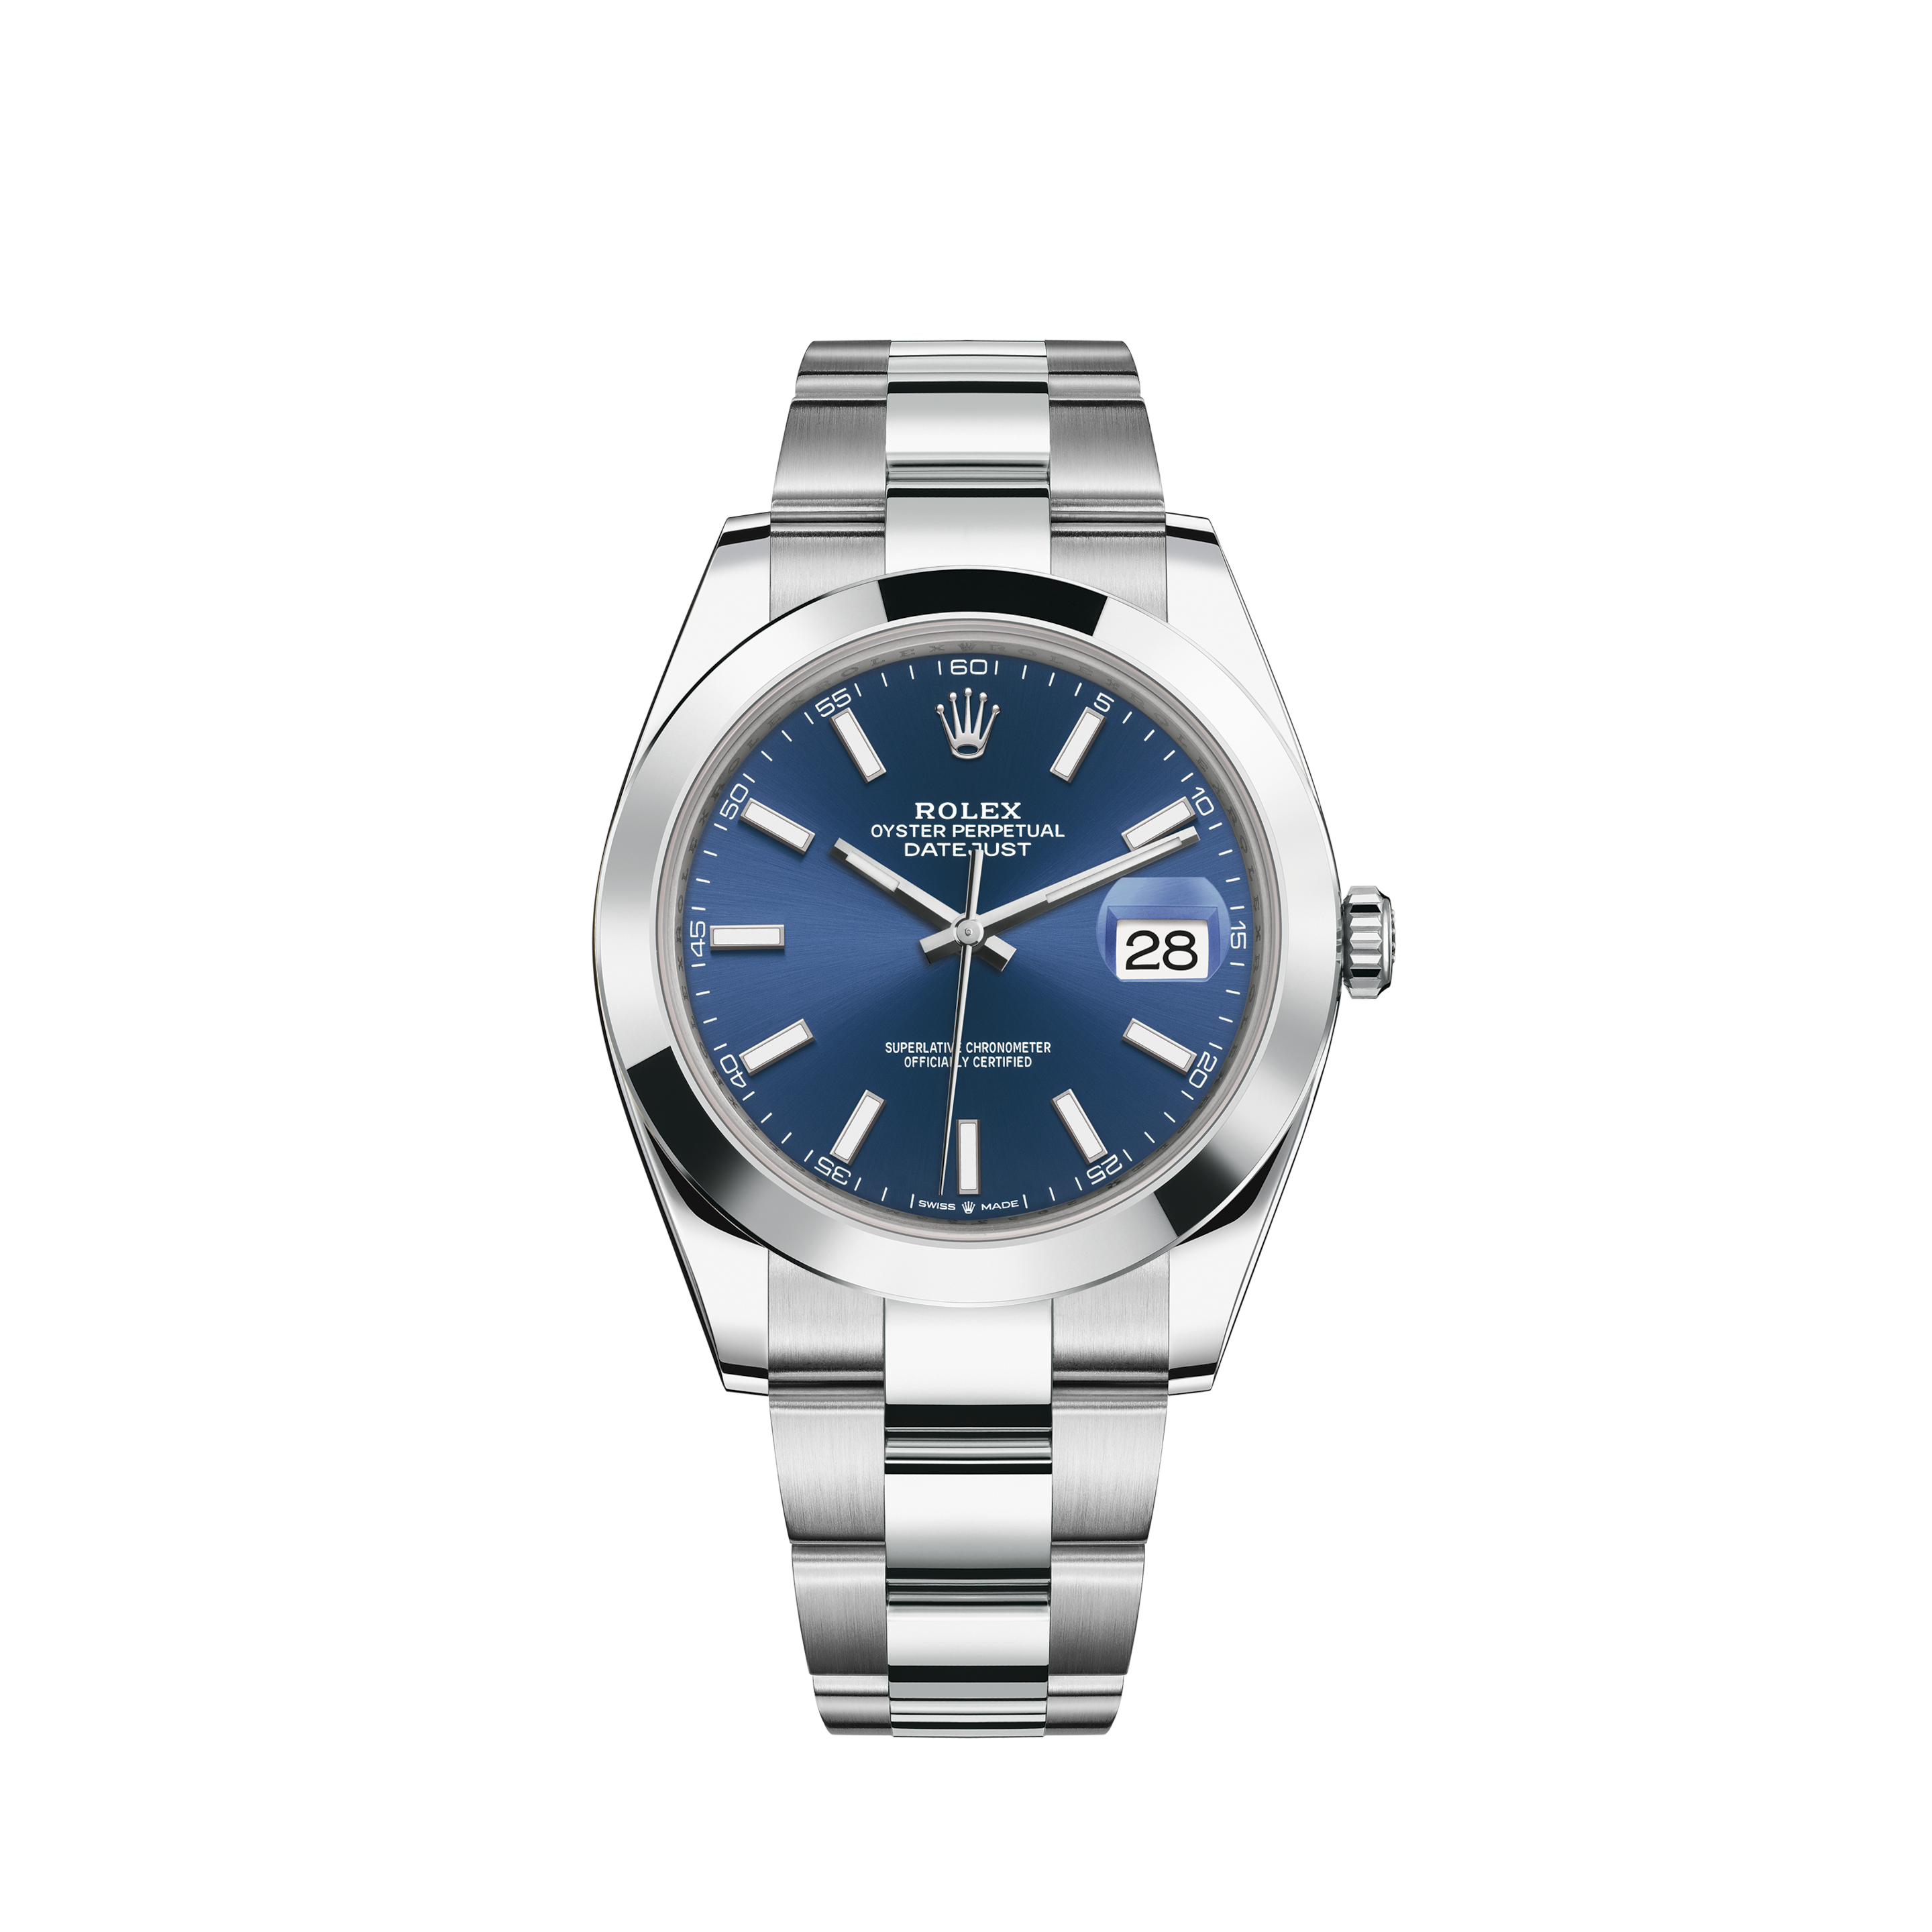 Rolex Datejust Perpetual 1601 with Linen Dial